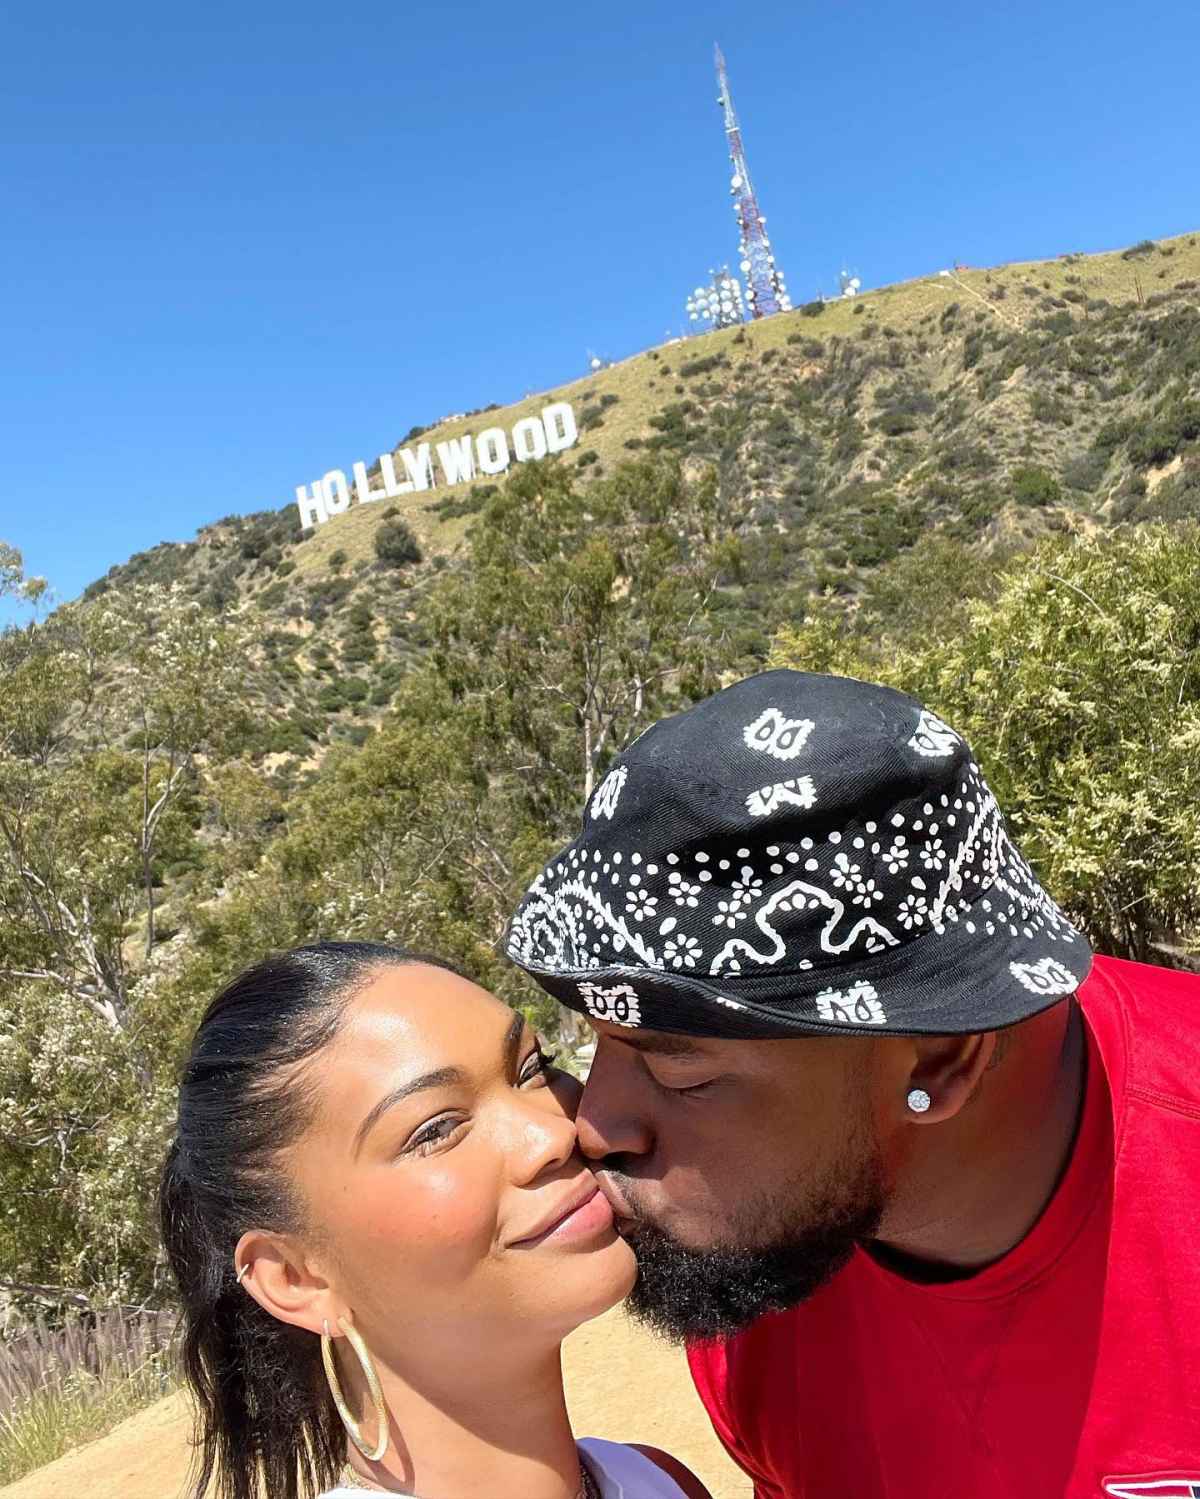 Chanel Iman Is Dating Davon Godchaux After Sterling Shepard Split